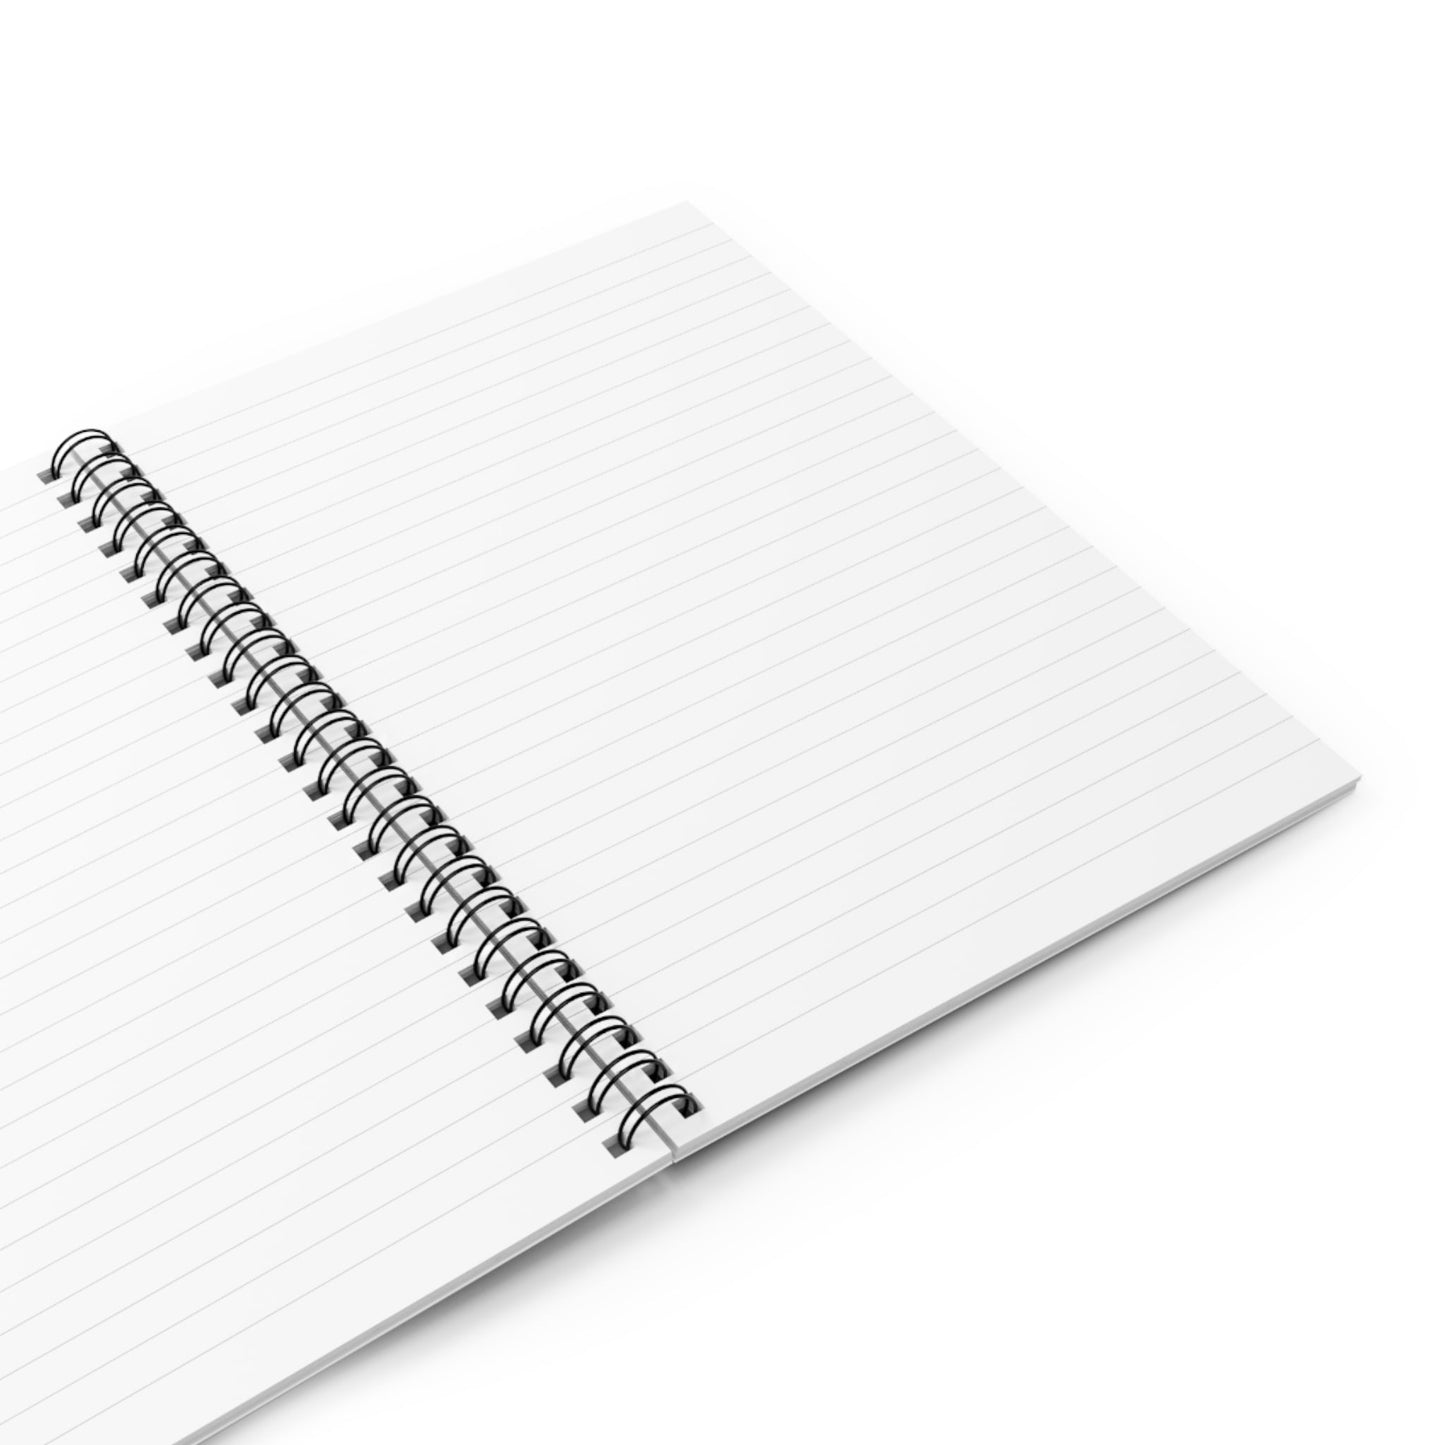 Spiral Notebook with Canada Mountain Landscape Cover Opened with Blank White College Ruled Pages